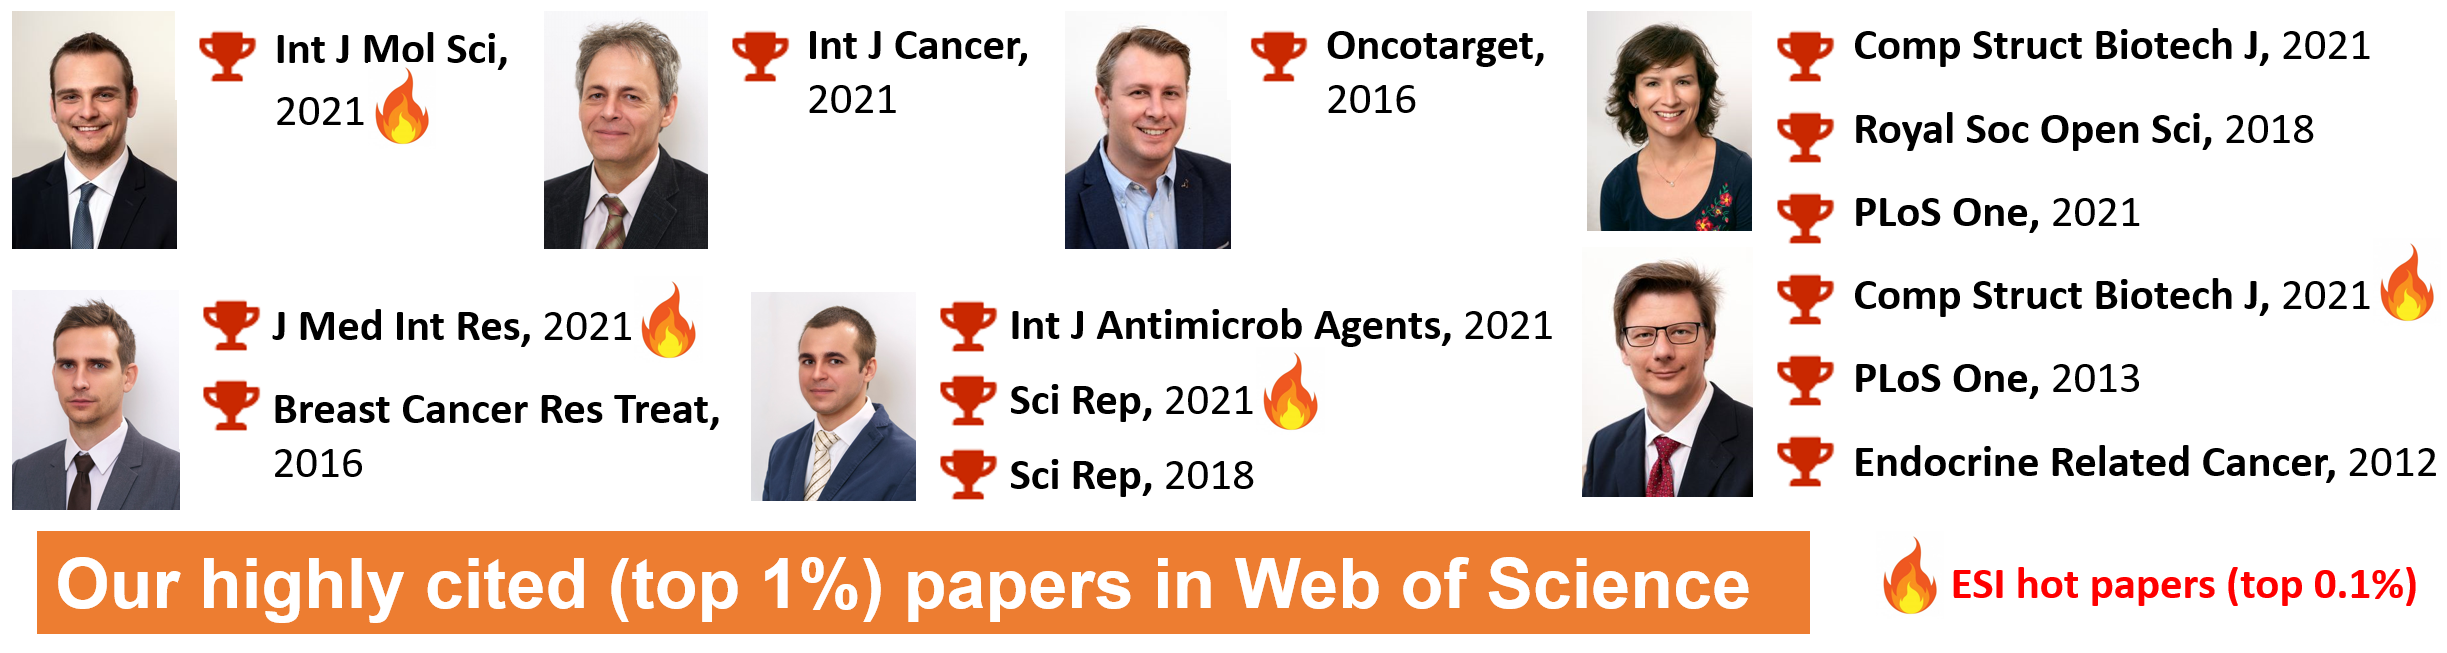 Highly cited papers